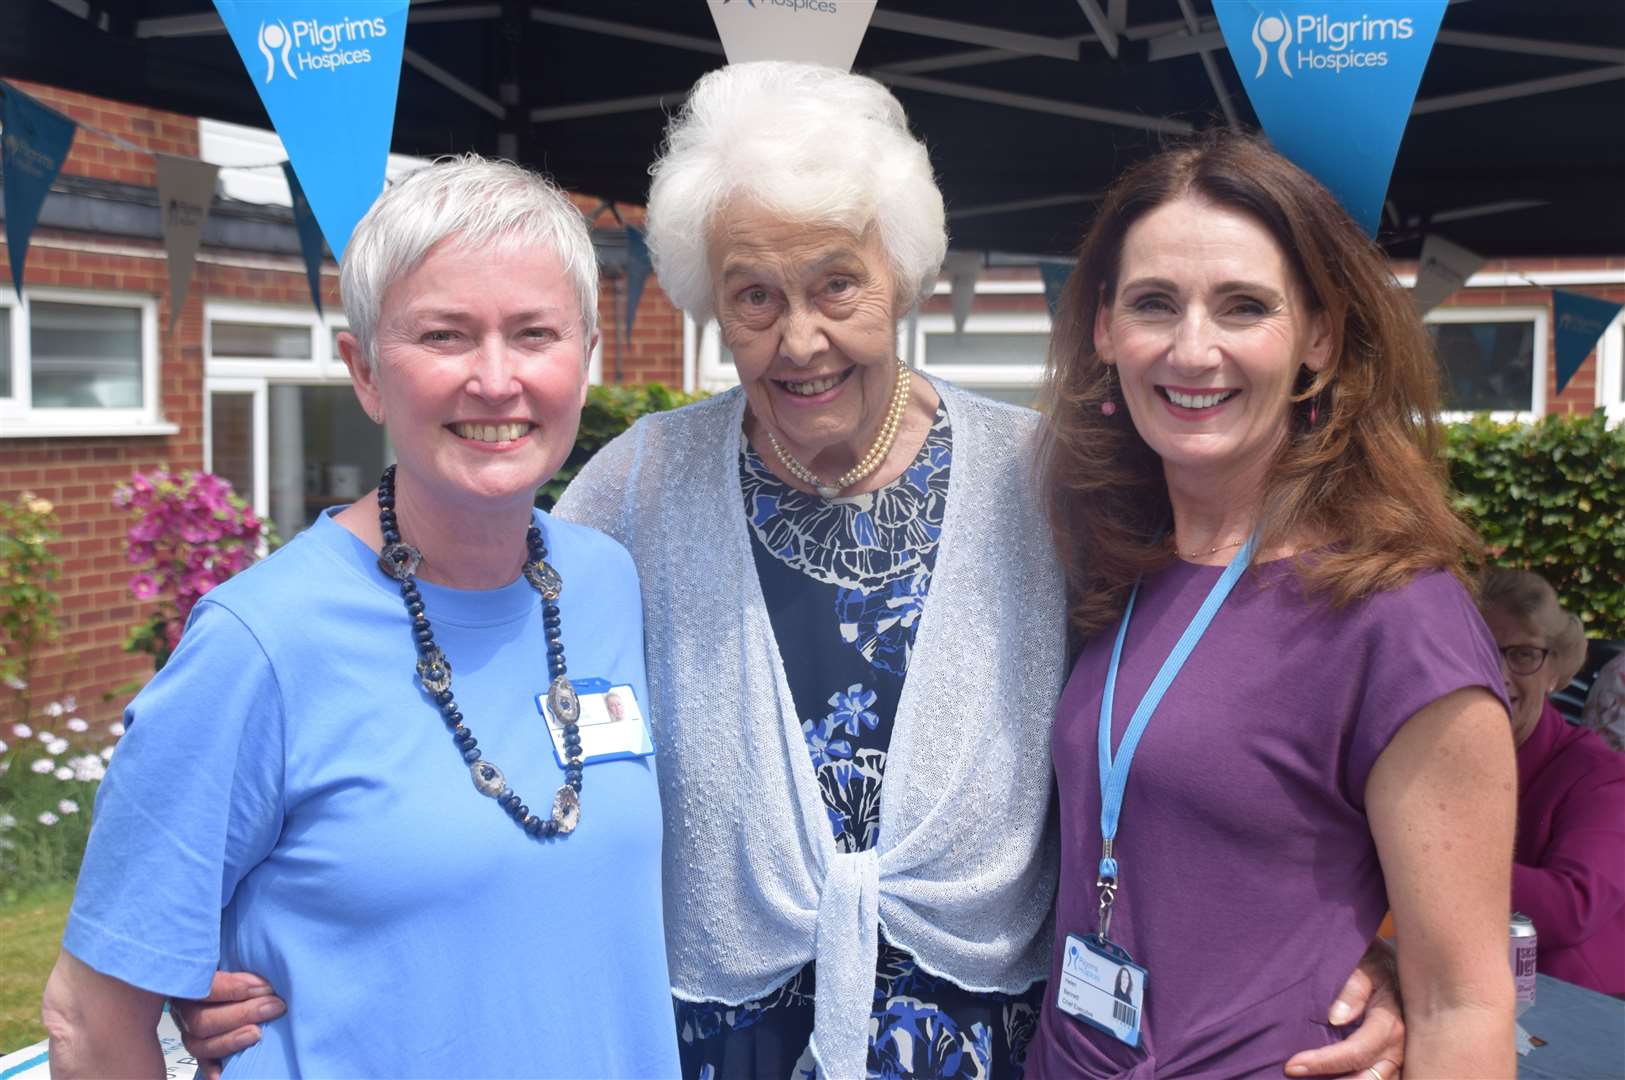 Pilgrims chair of trustees Karen Warden with Ann Robertson and chief executive Helen Bennett at the charity’s 40th anniversary celebrations last year